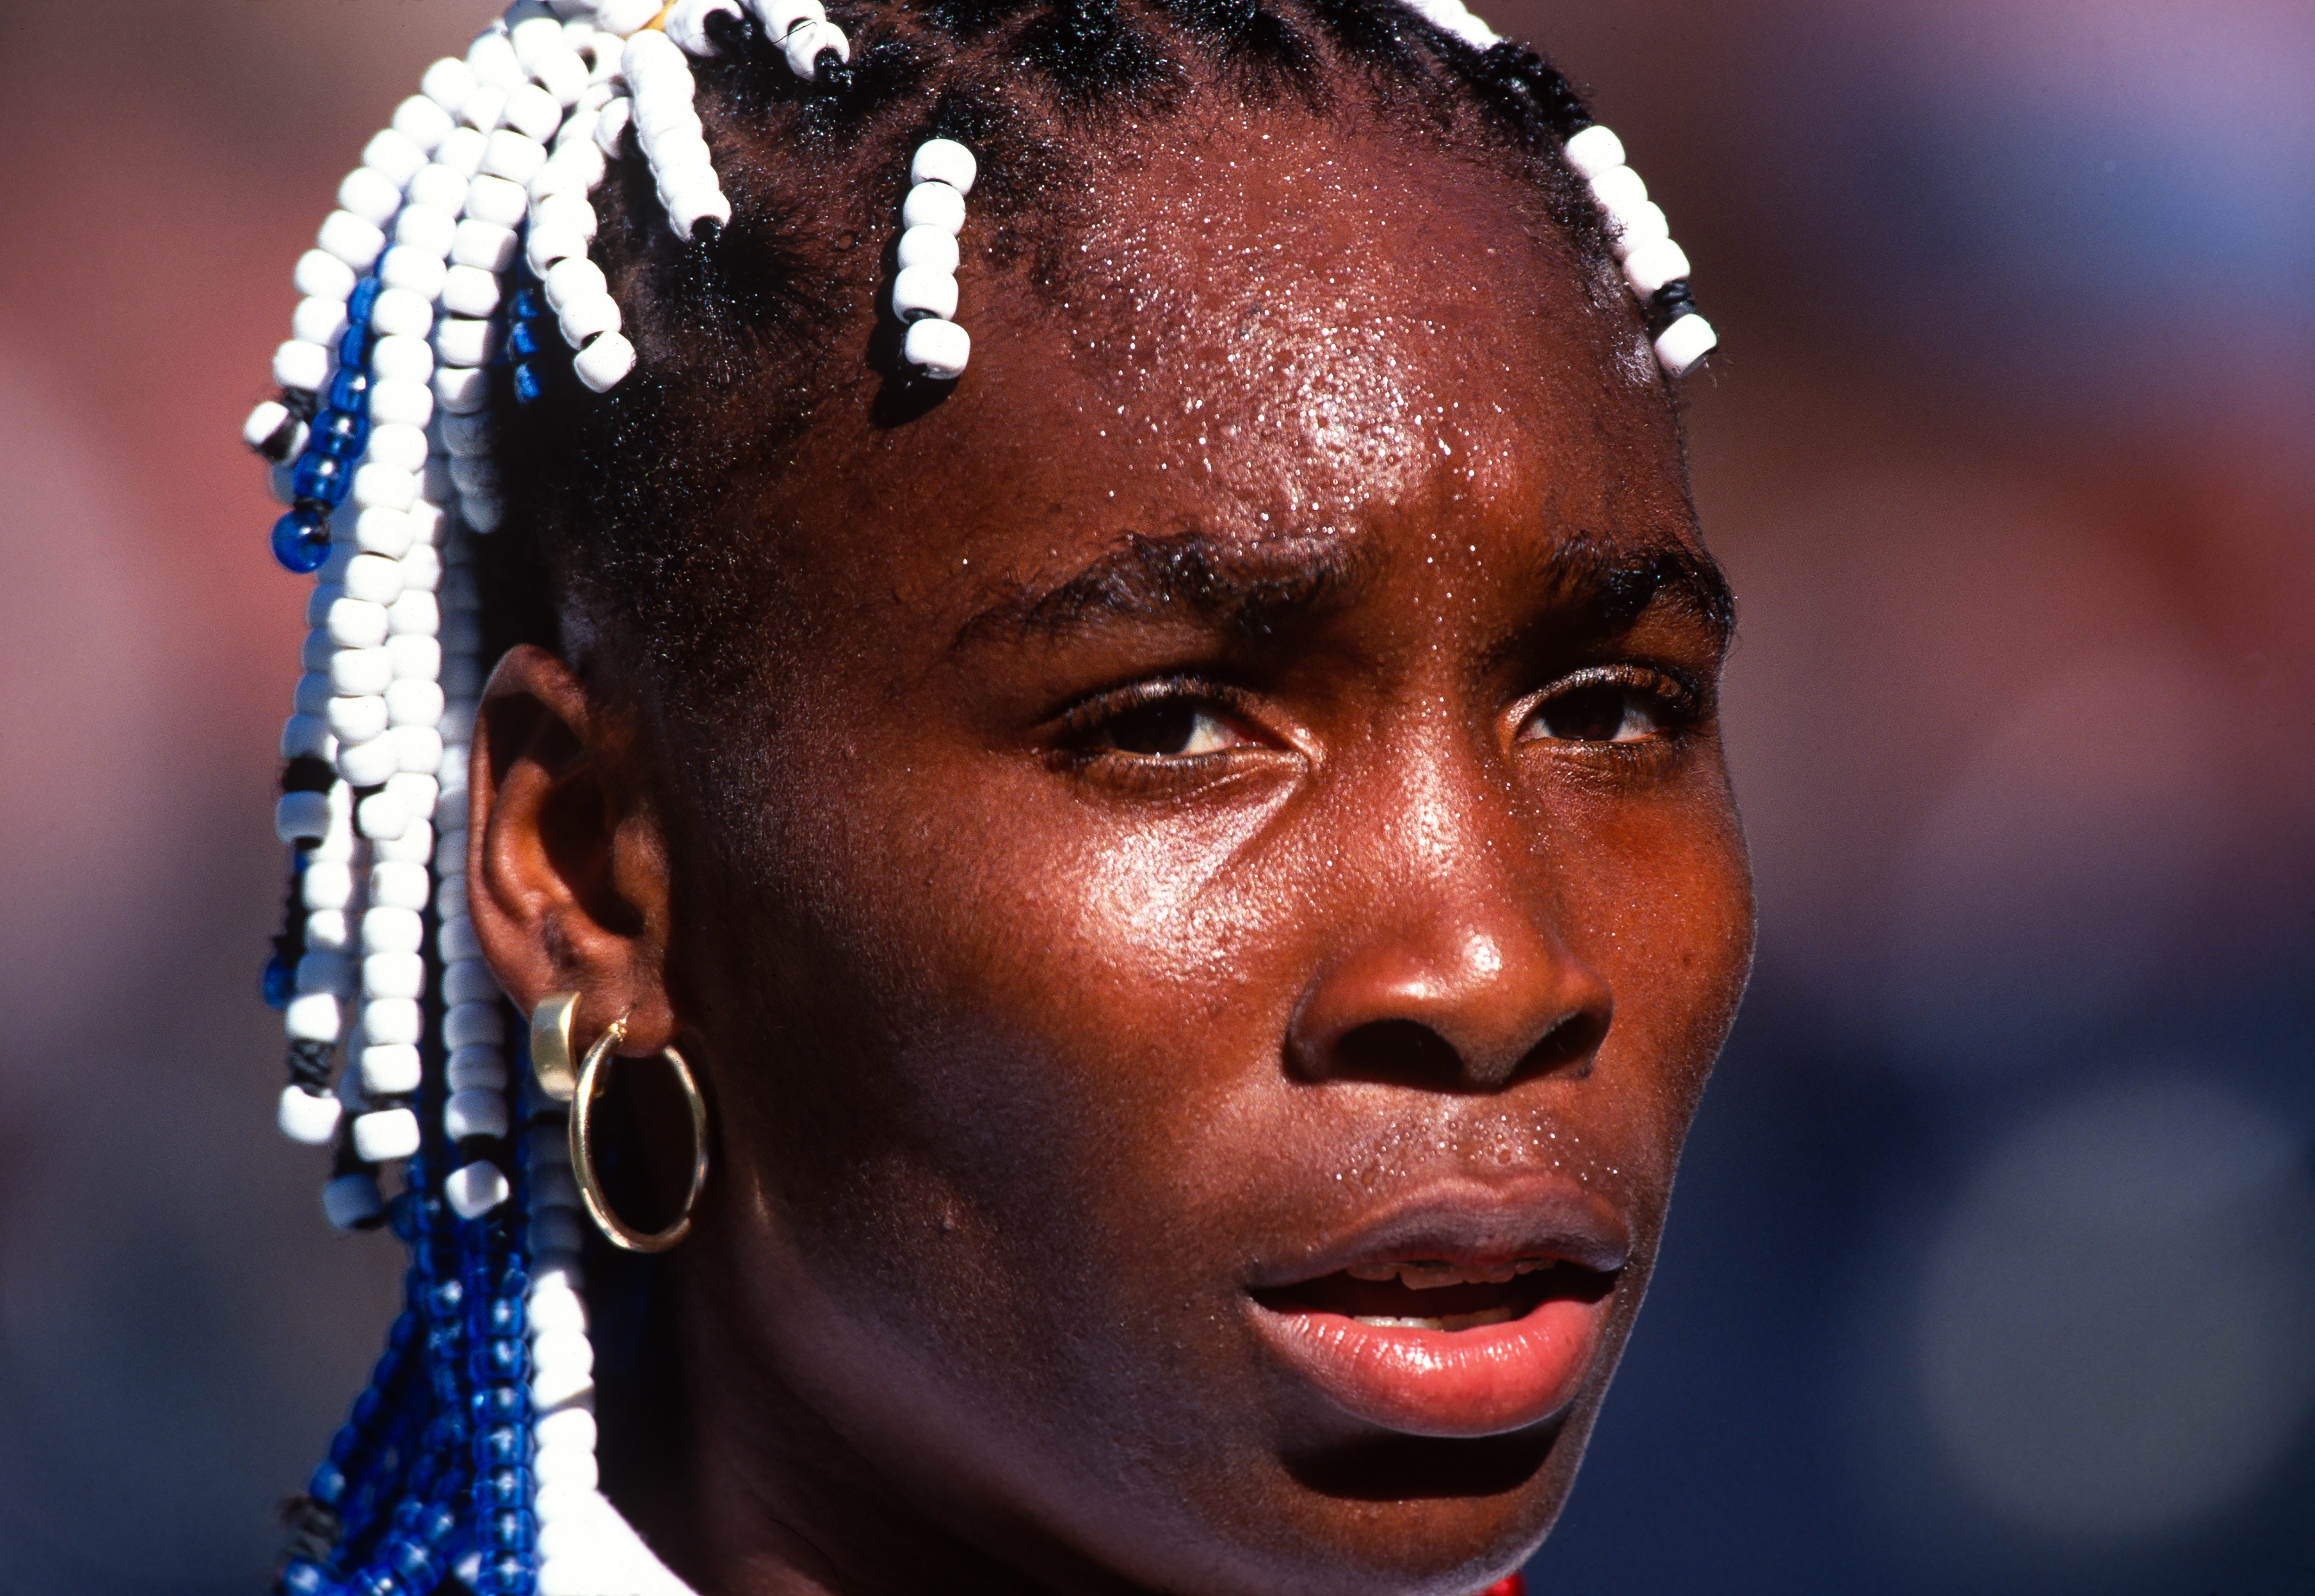 Venus Williams at the U.S. Open Tennis Championship in Flushing, New York on September 05, 1997. | Source: Getty Images